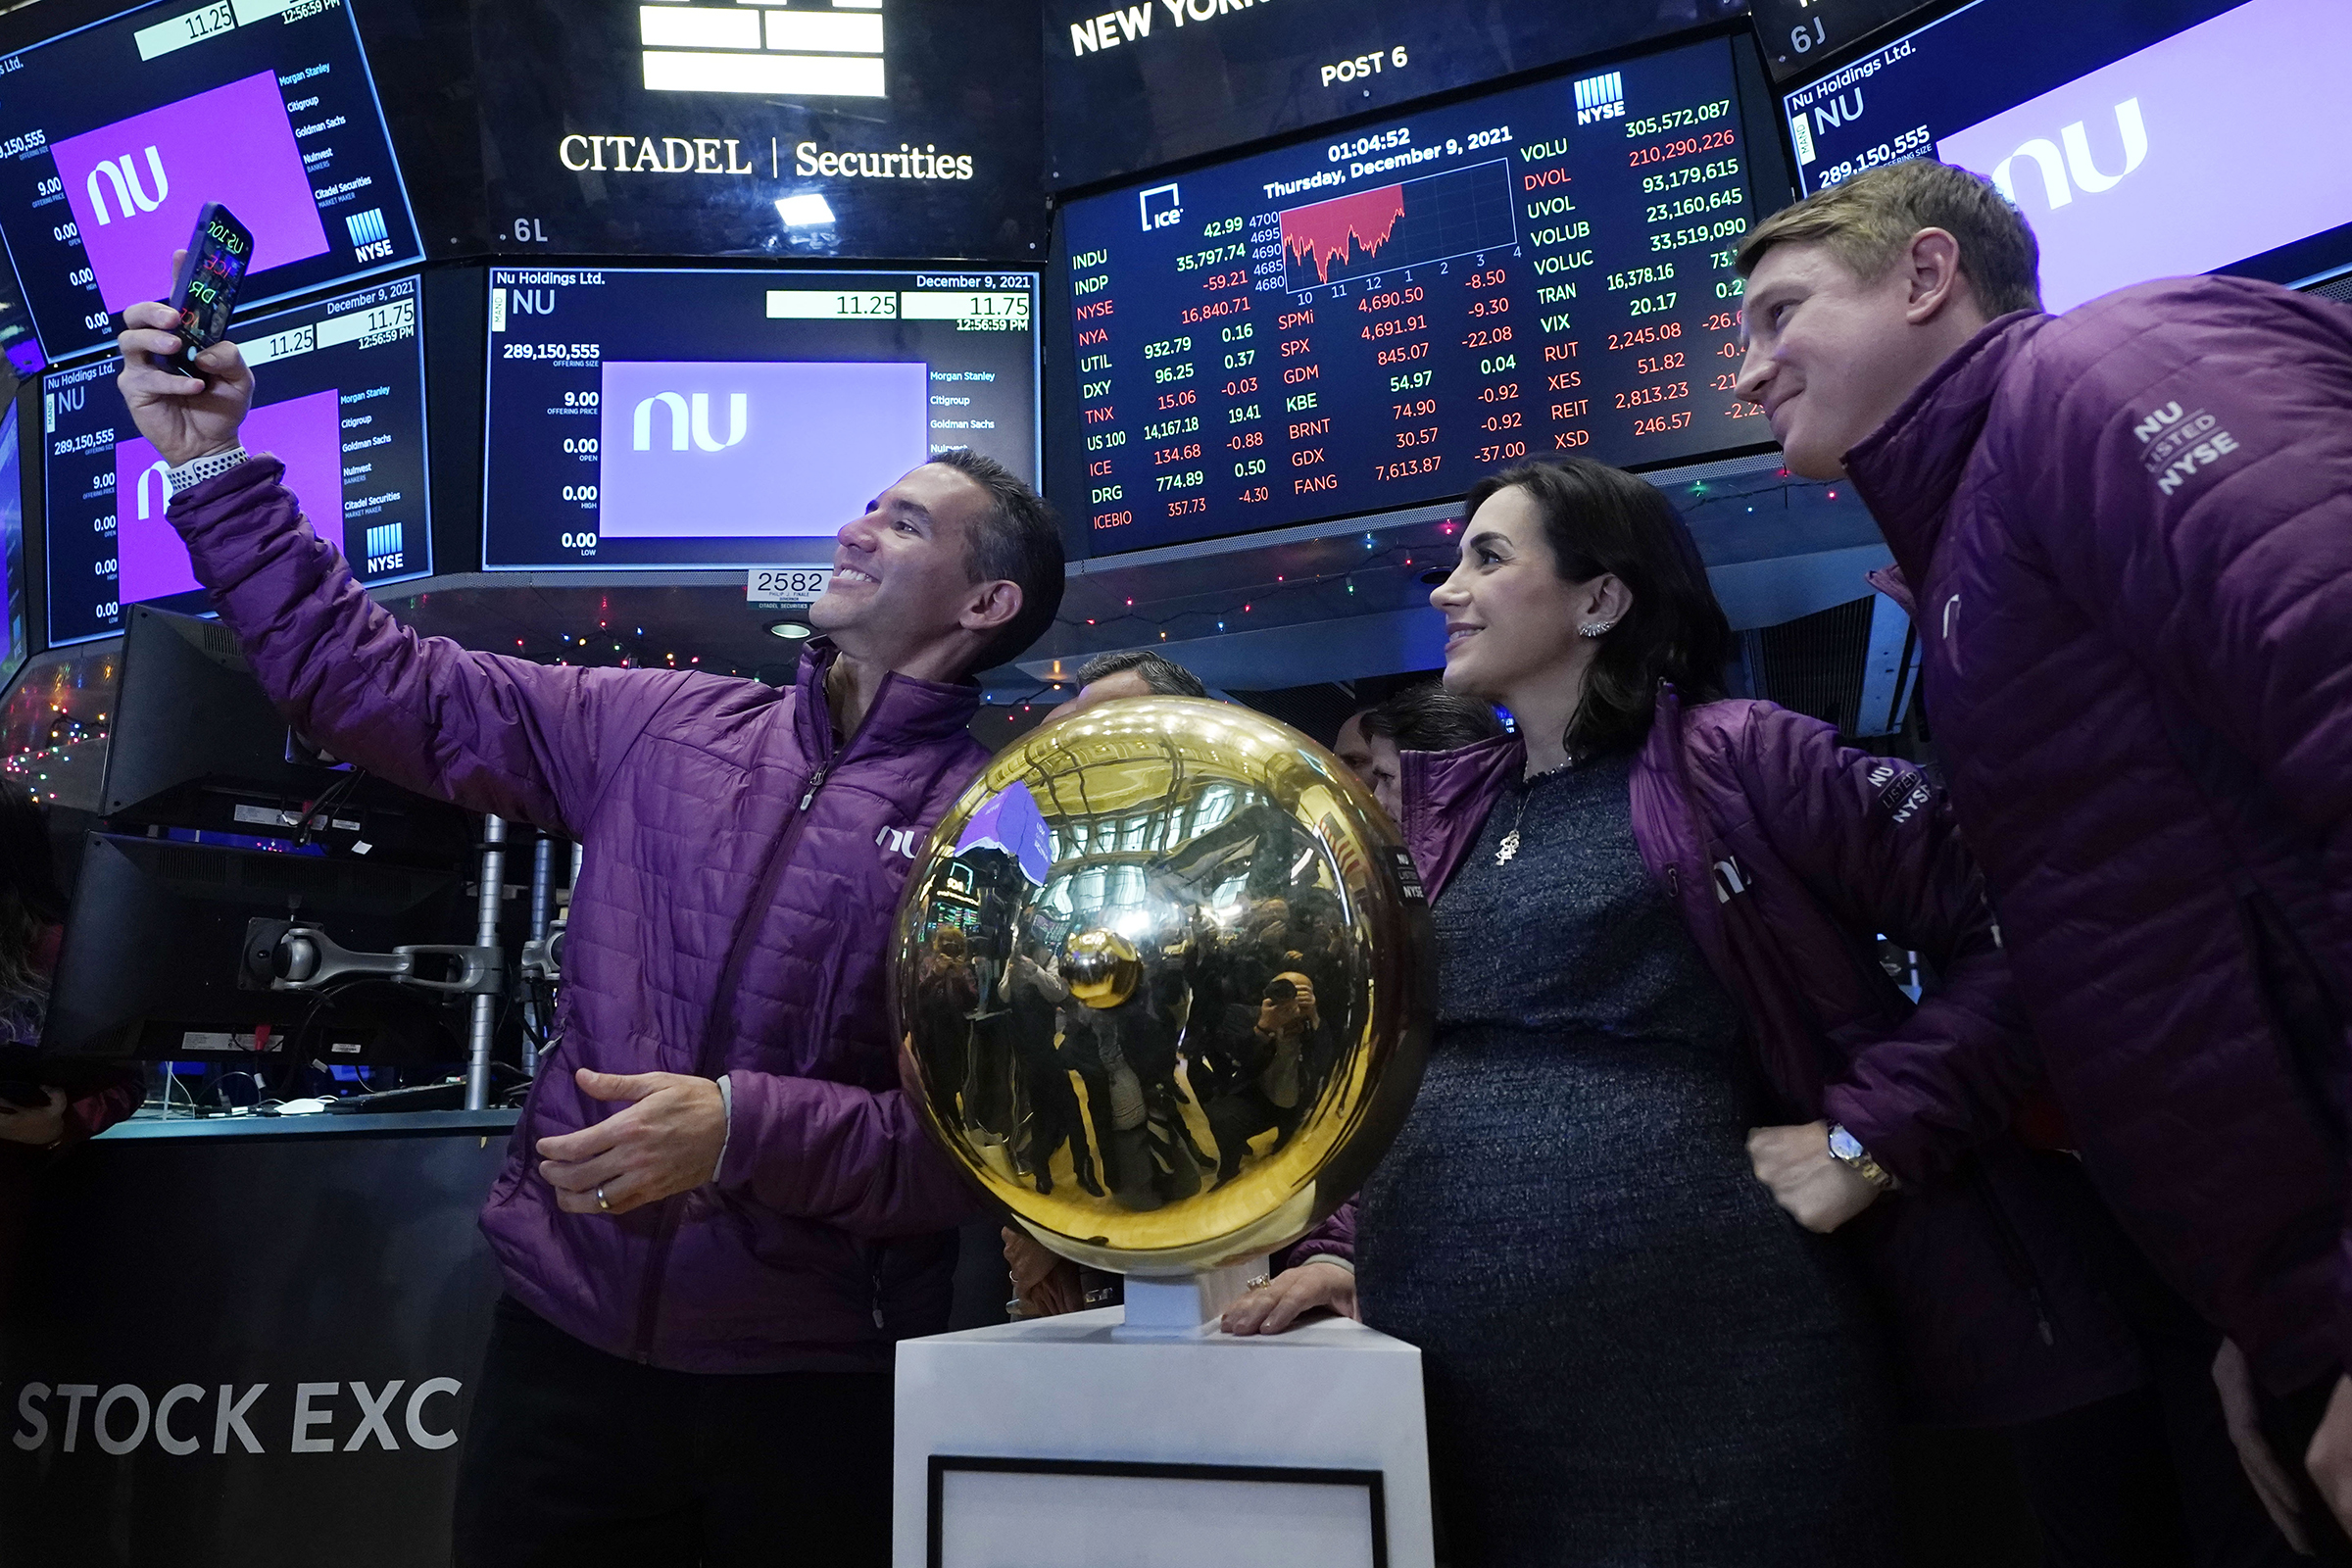 Nubank CEO David Velez, left, takes a selfie photo with his company's co-Founders Cristina Junqueira, and Edward Wible, before he rings the ceremonial first trade bell during his IPO, on the New York Stock Exchange trading floor, Thursday, Dec. 9, 2021. (Richard Drew—AP)